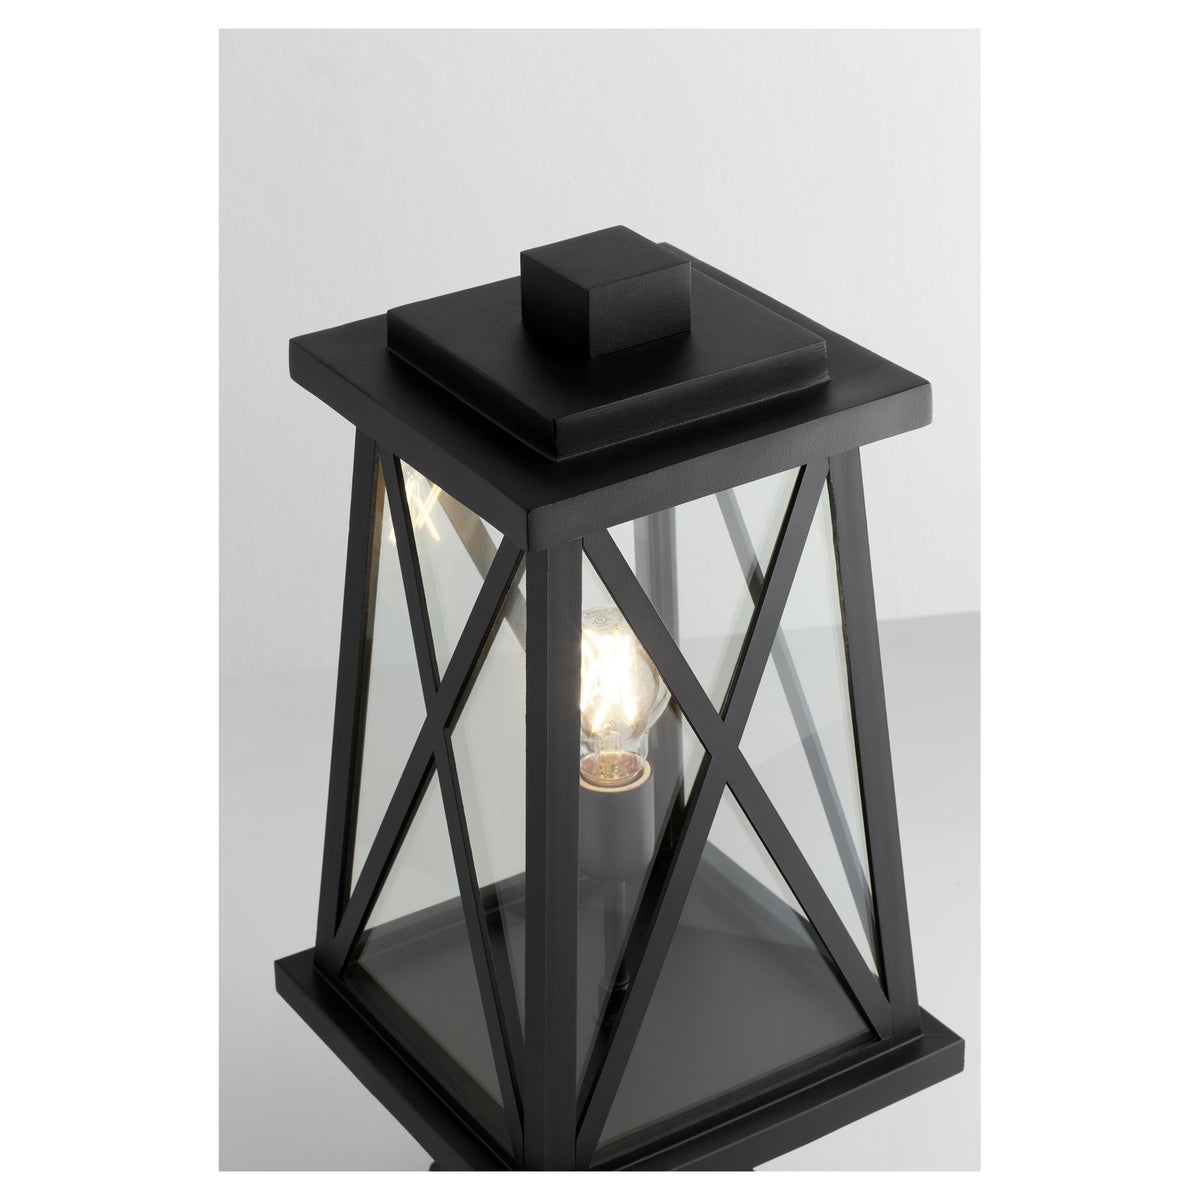 A black outdoor post light with a classic X-brace design, emitting a warm glow. Perfect for any outdoor space. Brand: Quorum International. Wattage: 100W. Input Voltage: 120V. Bulbs: 1 (not included). Bulb Base Type: Medium E26. Dimmable: Yes. Certifications: UL Listed. Safety Rating: Wet Location. Finish: Noir. Dimensions: 9.25"W x 18.5"H. Warranty: 2 Years.